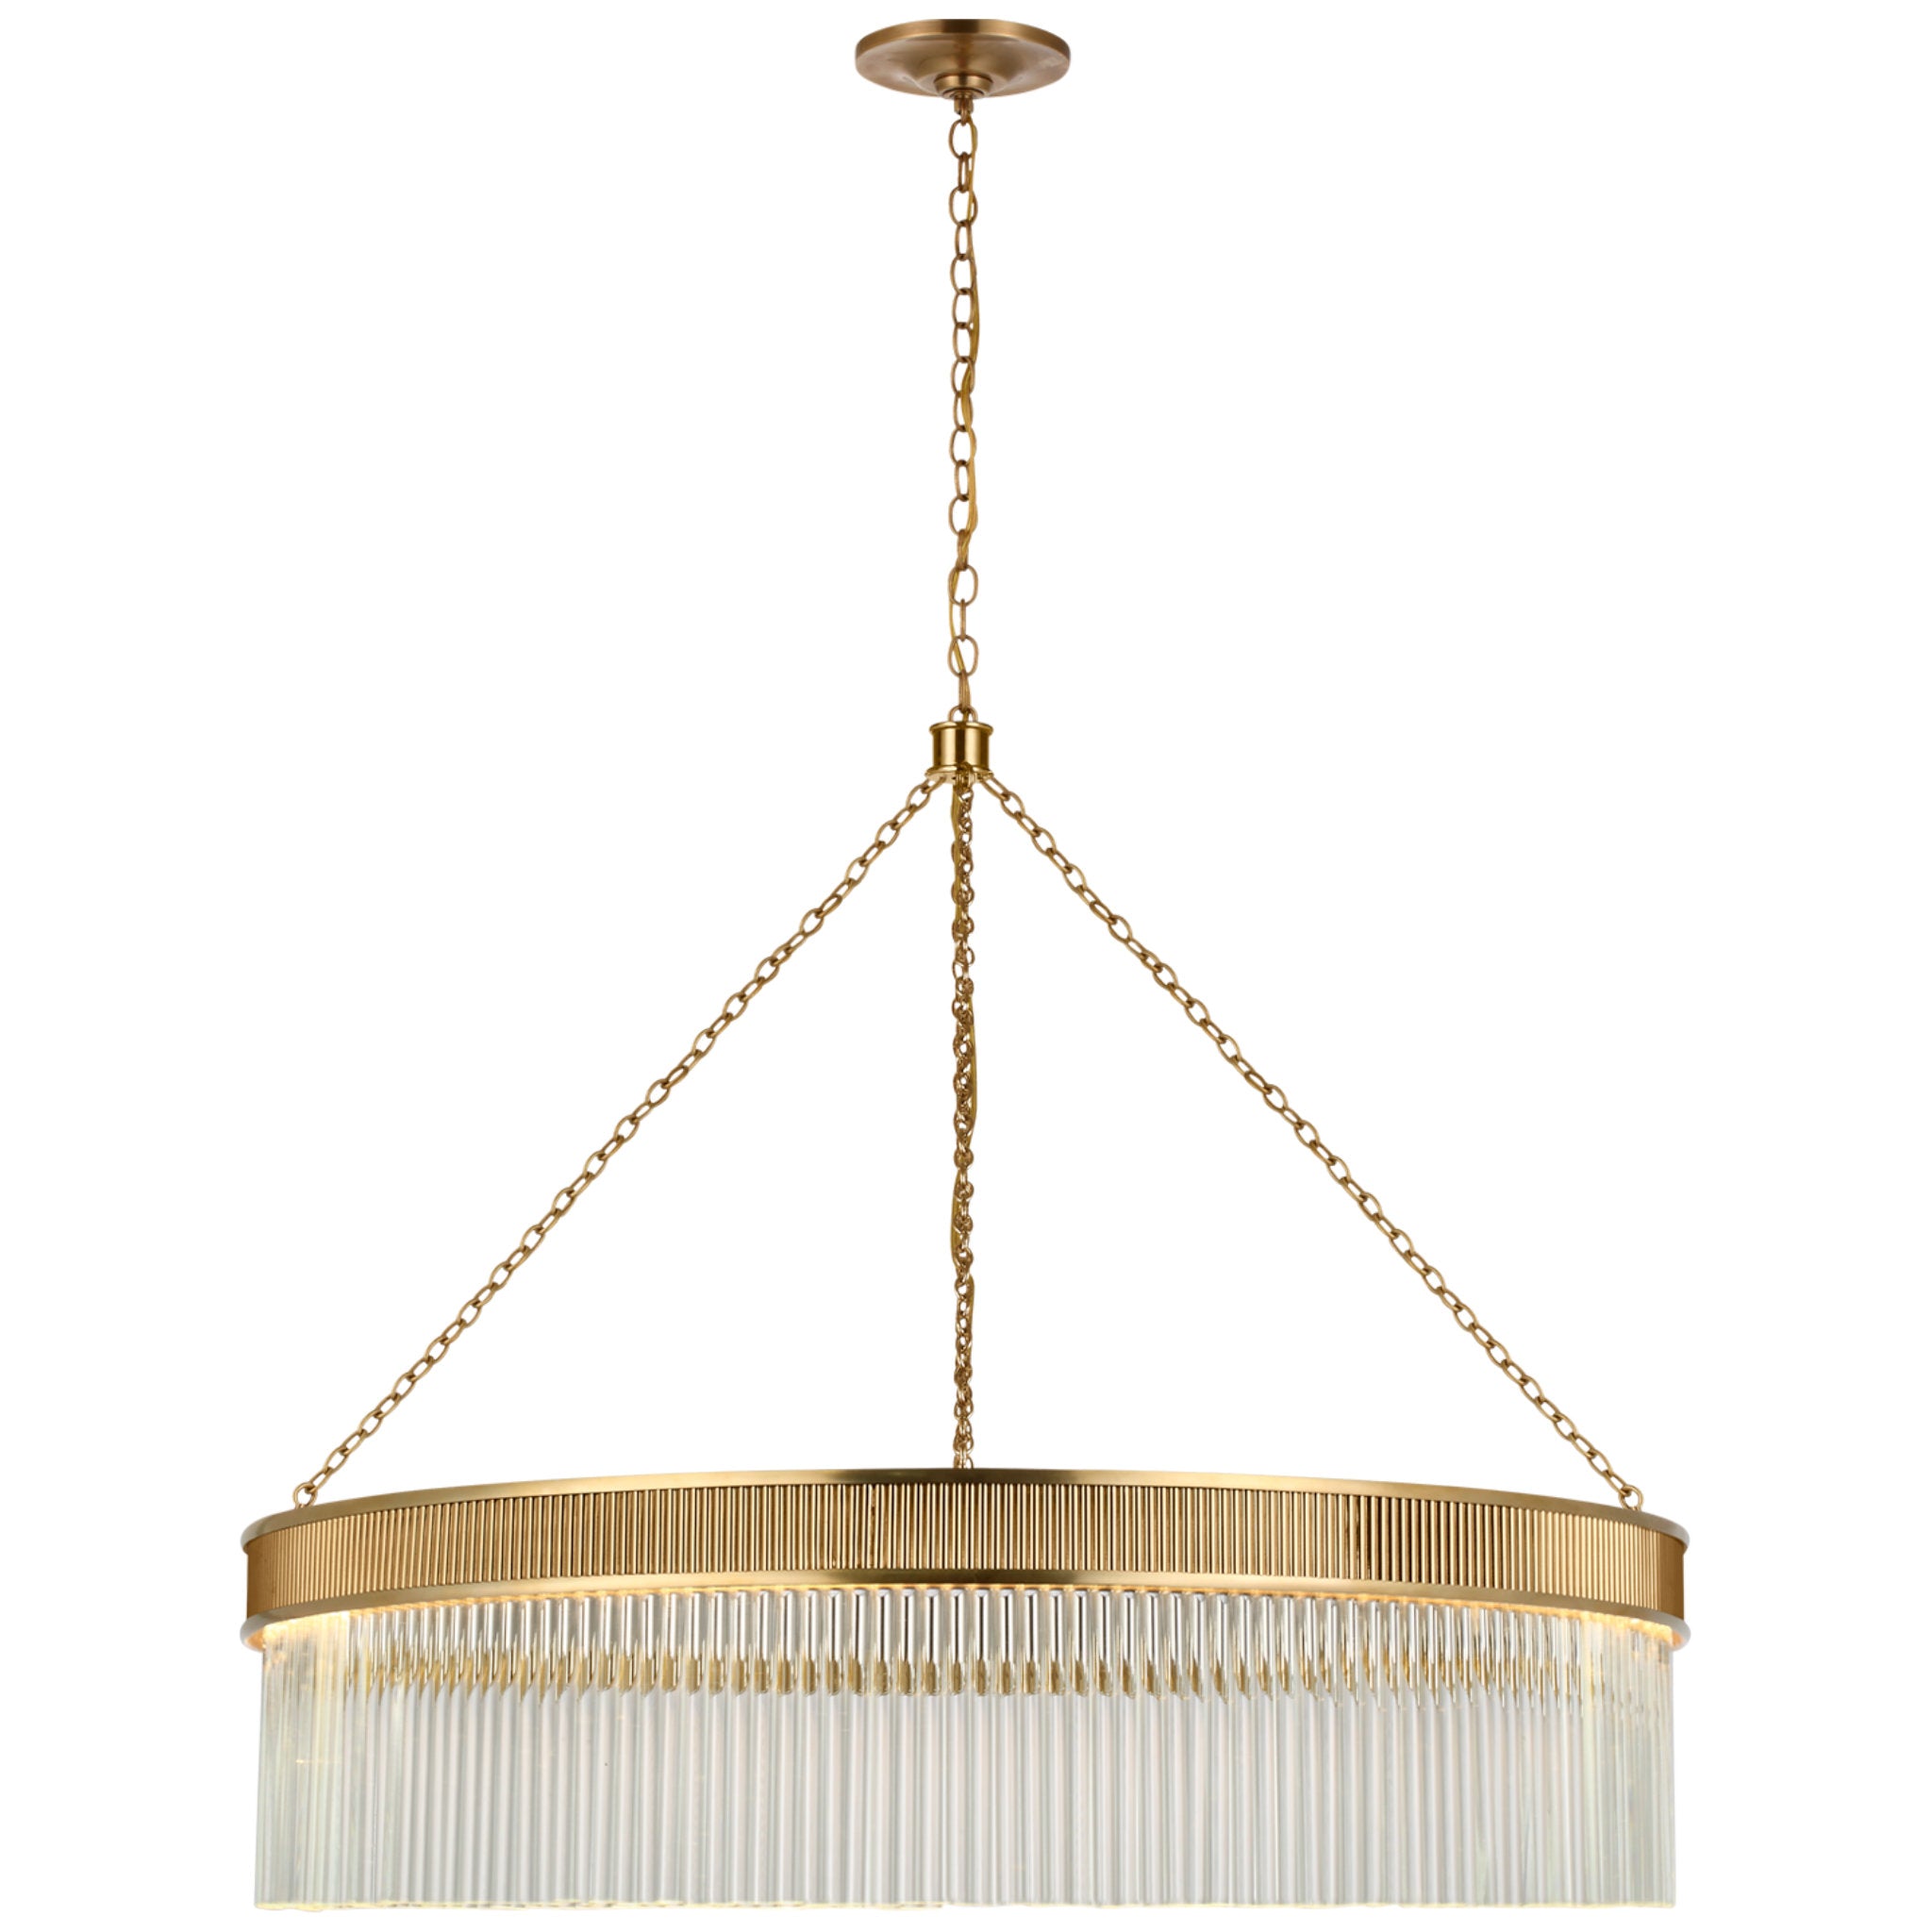 Marie Flanigan Menil Large Chandelier in Soft Brass with Crystal Rods